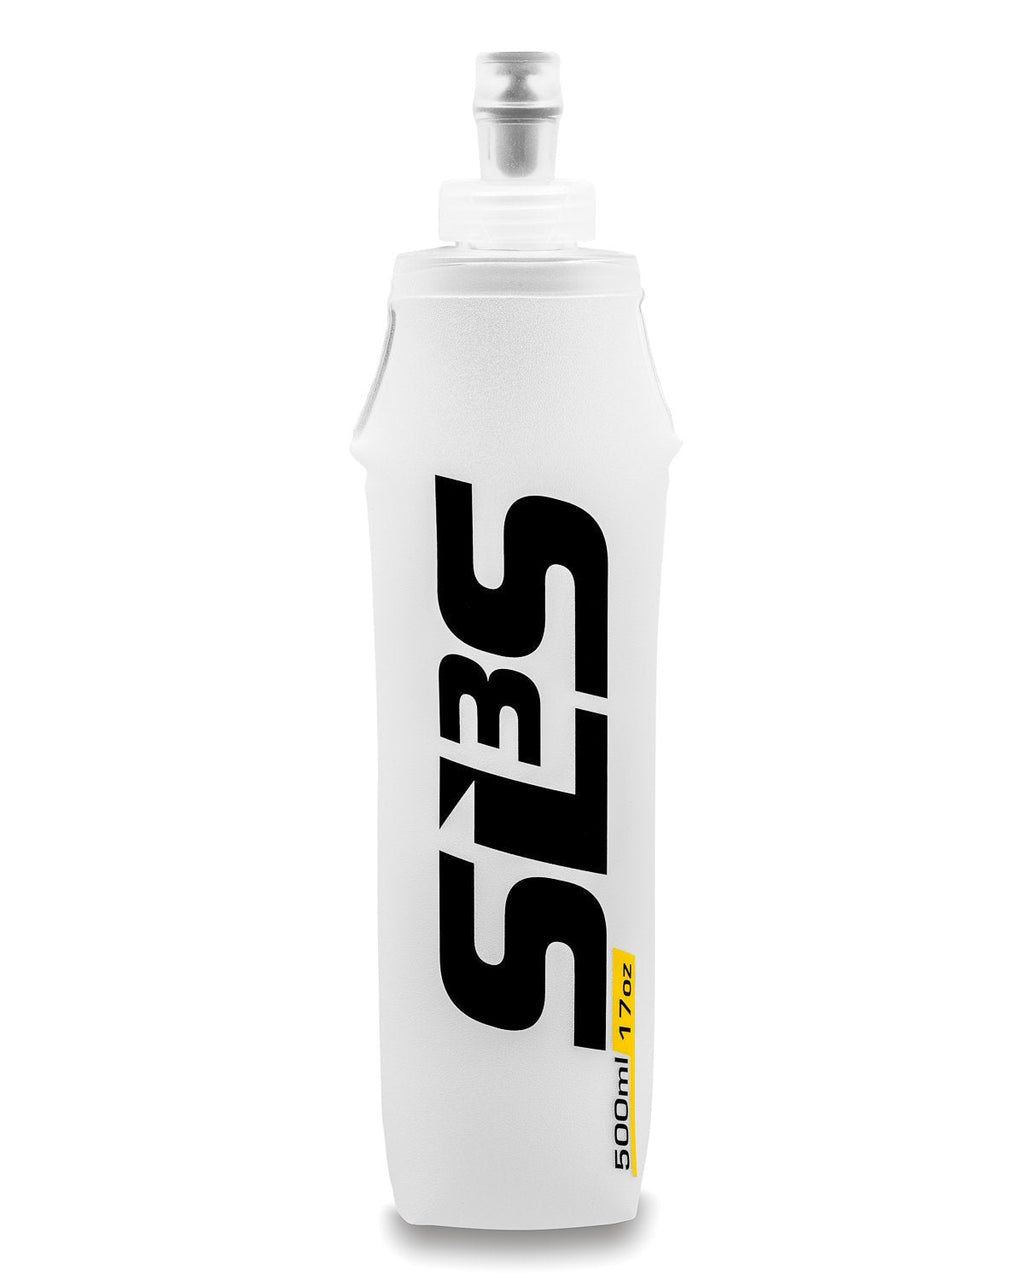 [AUSTRALIA] - SLS3 Soft Flask Water Bottle | 10 oz Hydration for Running | Collapsible | Portable | Compact | Reusable | with Bite Valve | German Designed Clear 2 bottles 